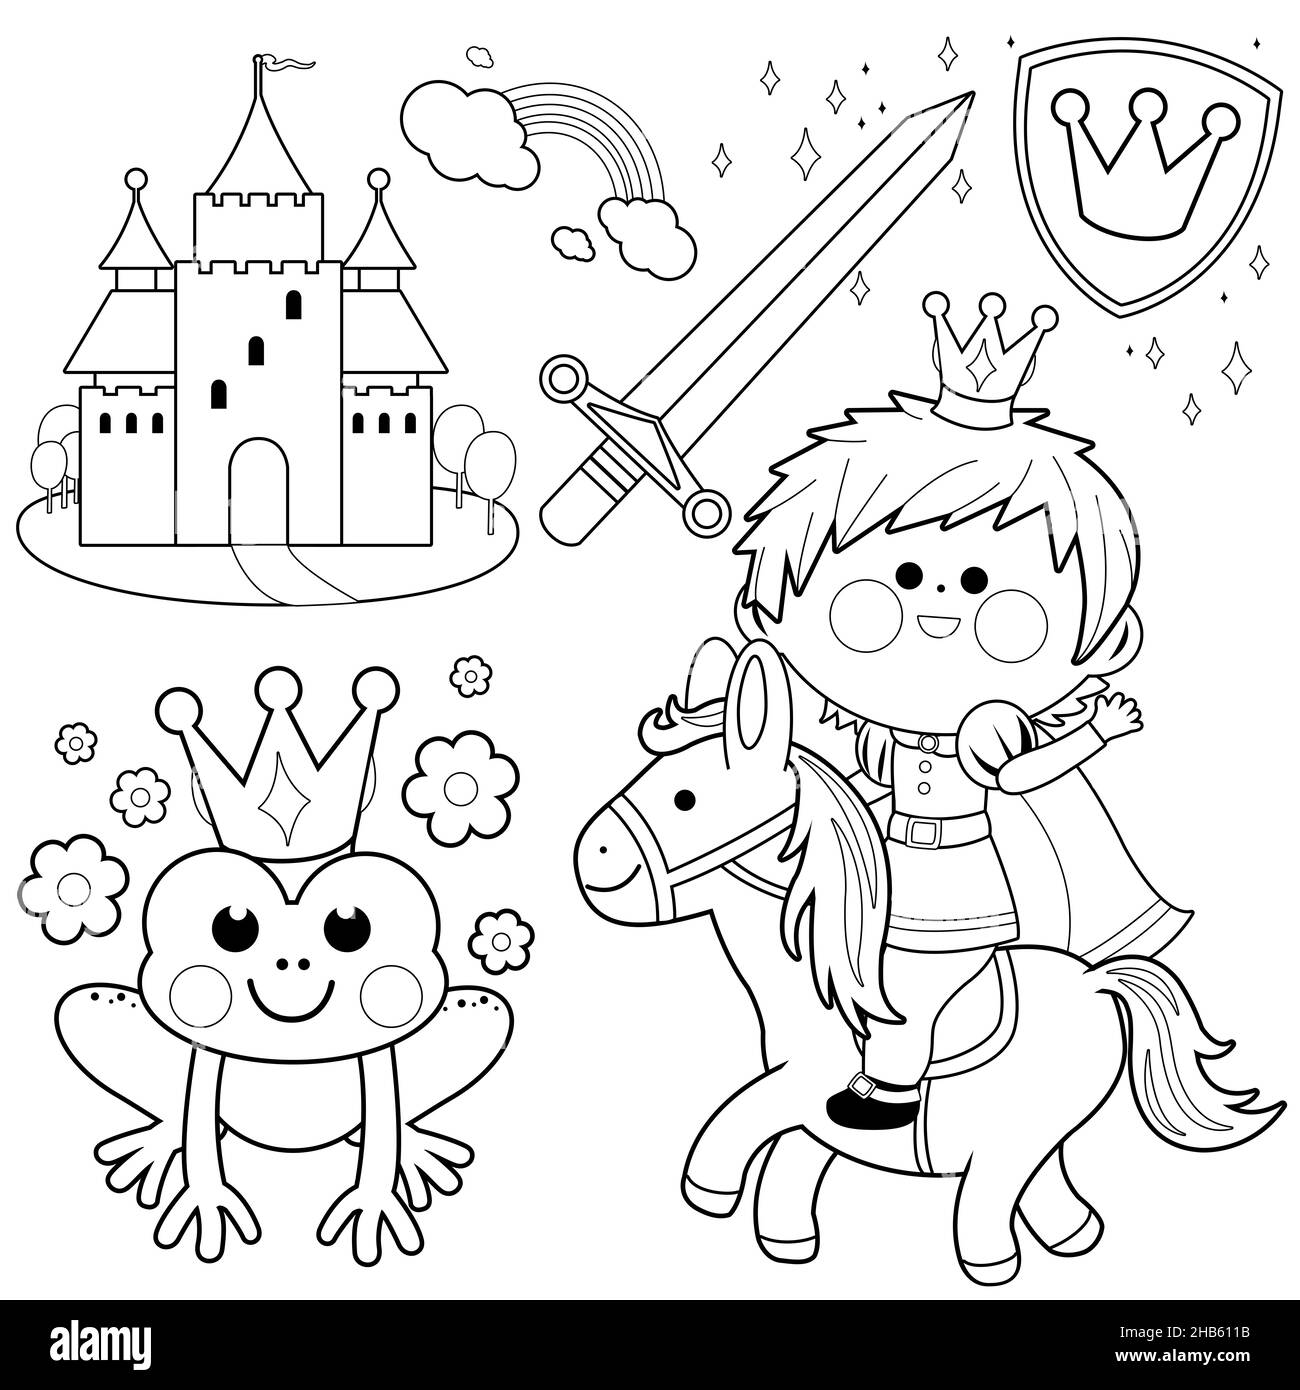 Prince riding a horse fairy tale set. Black and white coloring page. Stock Photo